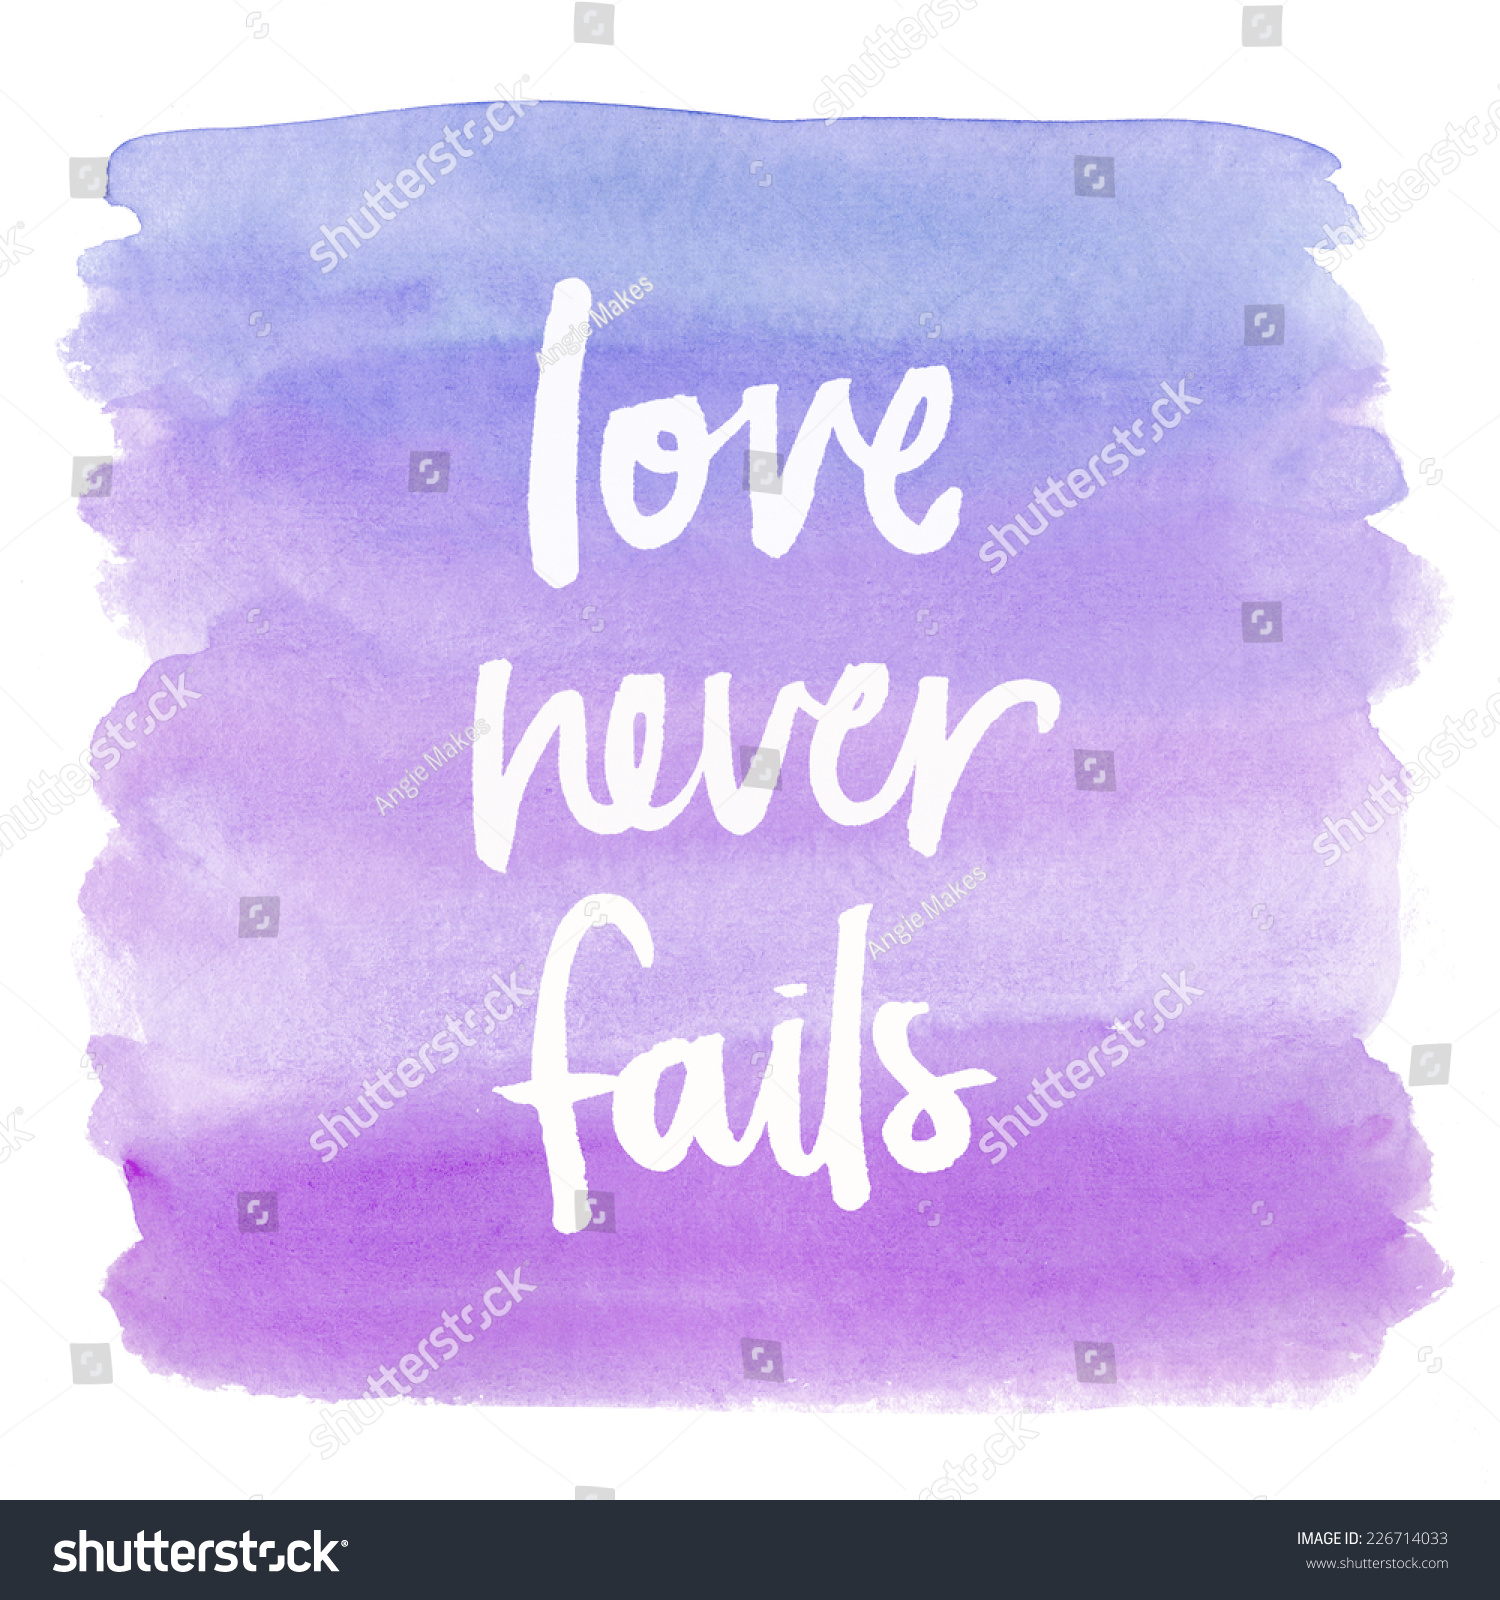 Love Never Fails Quote On Watercolor Stock Illustration 226714033 ...